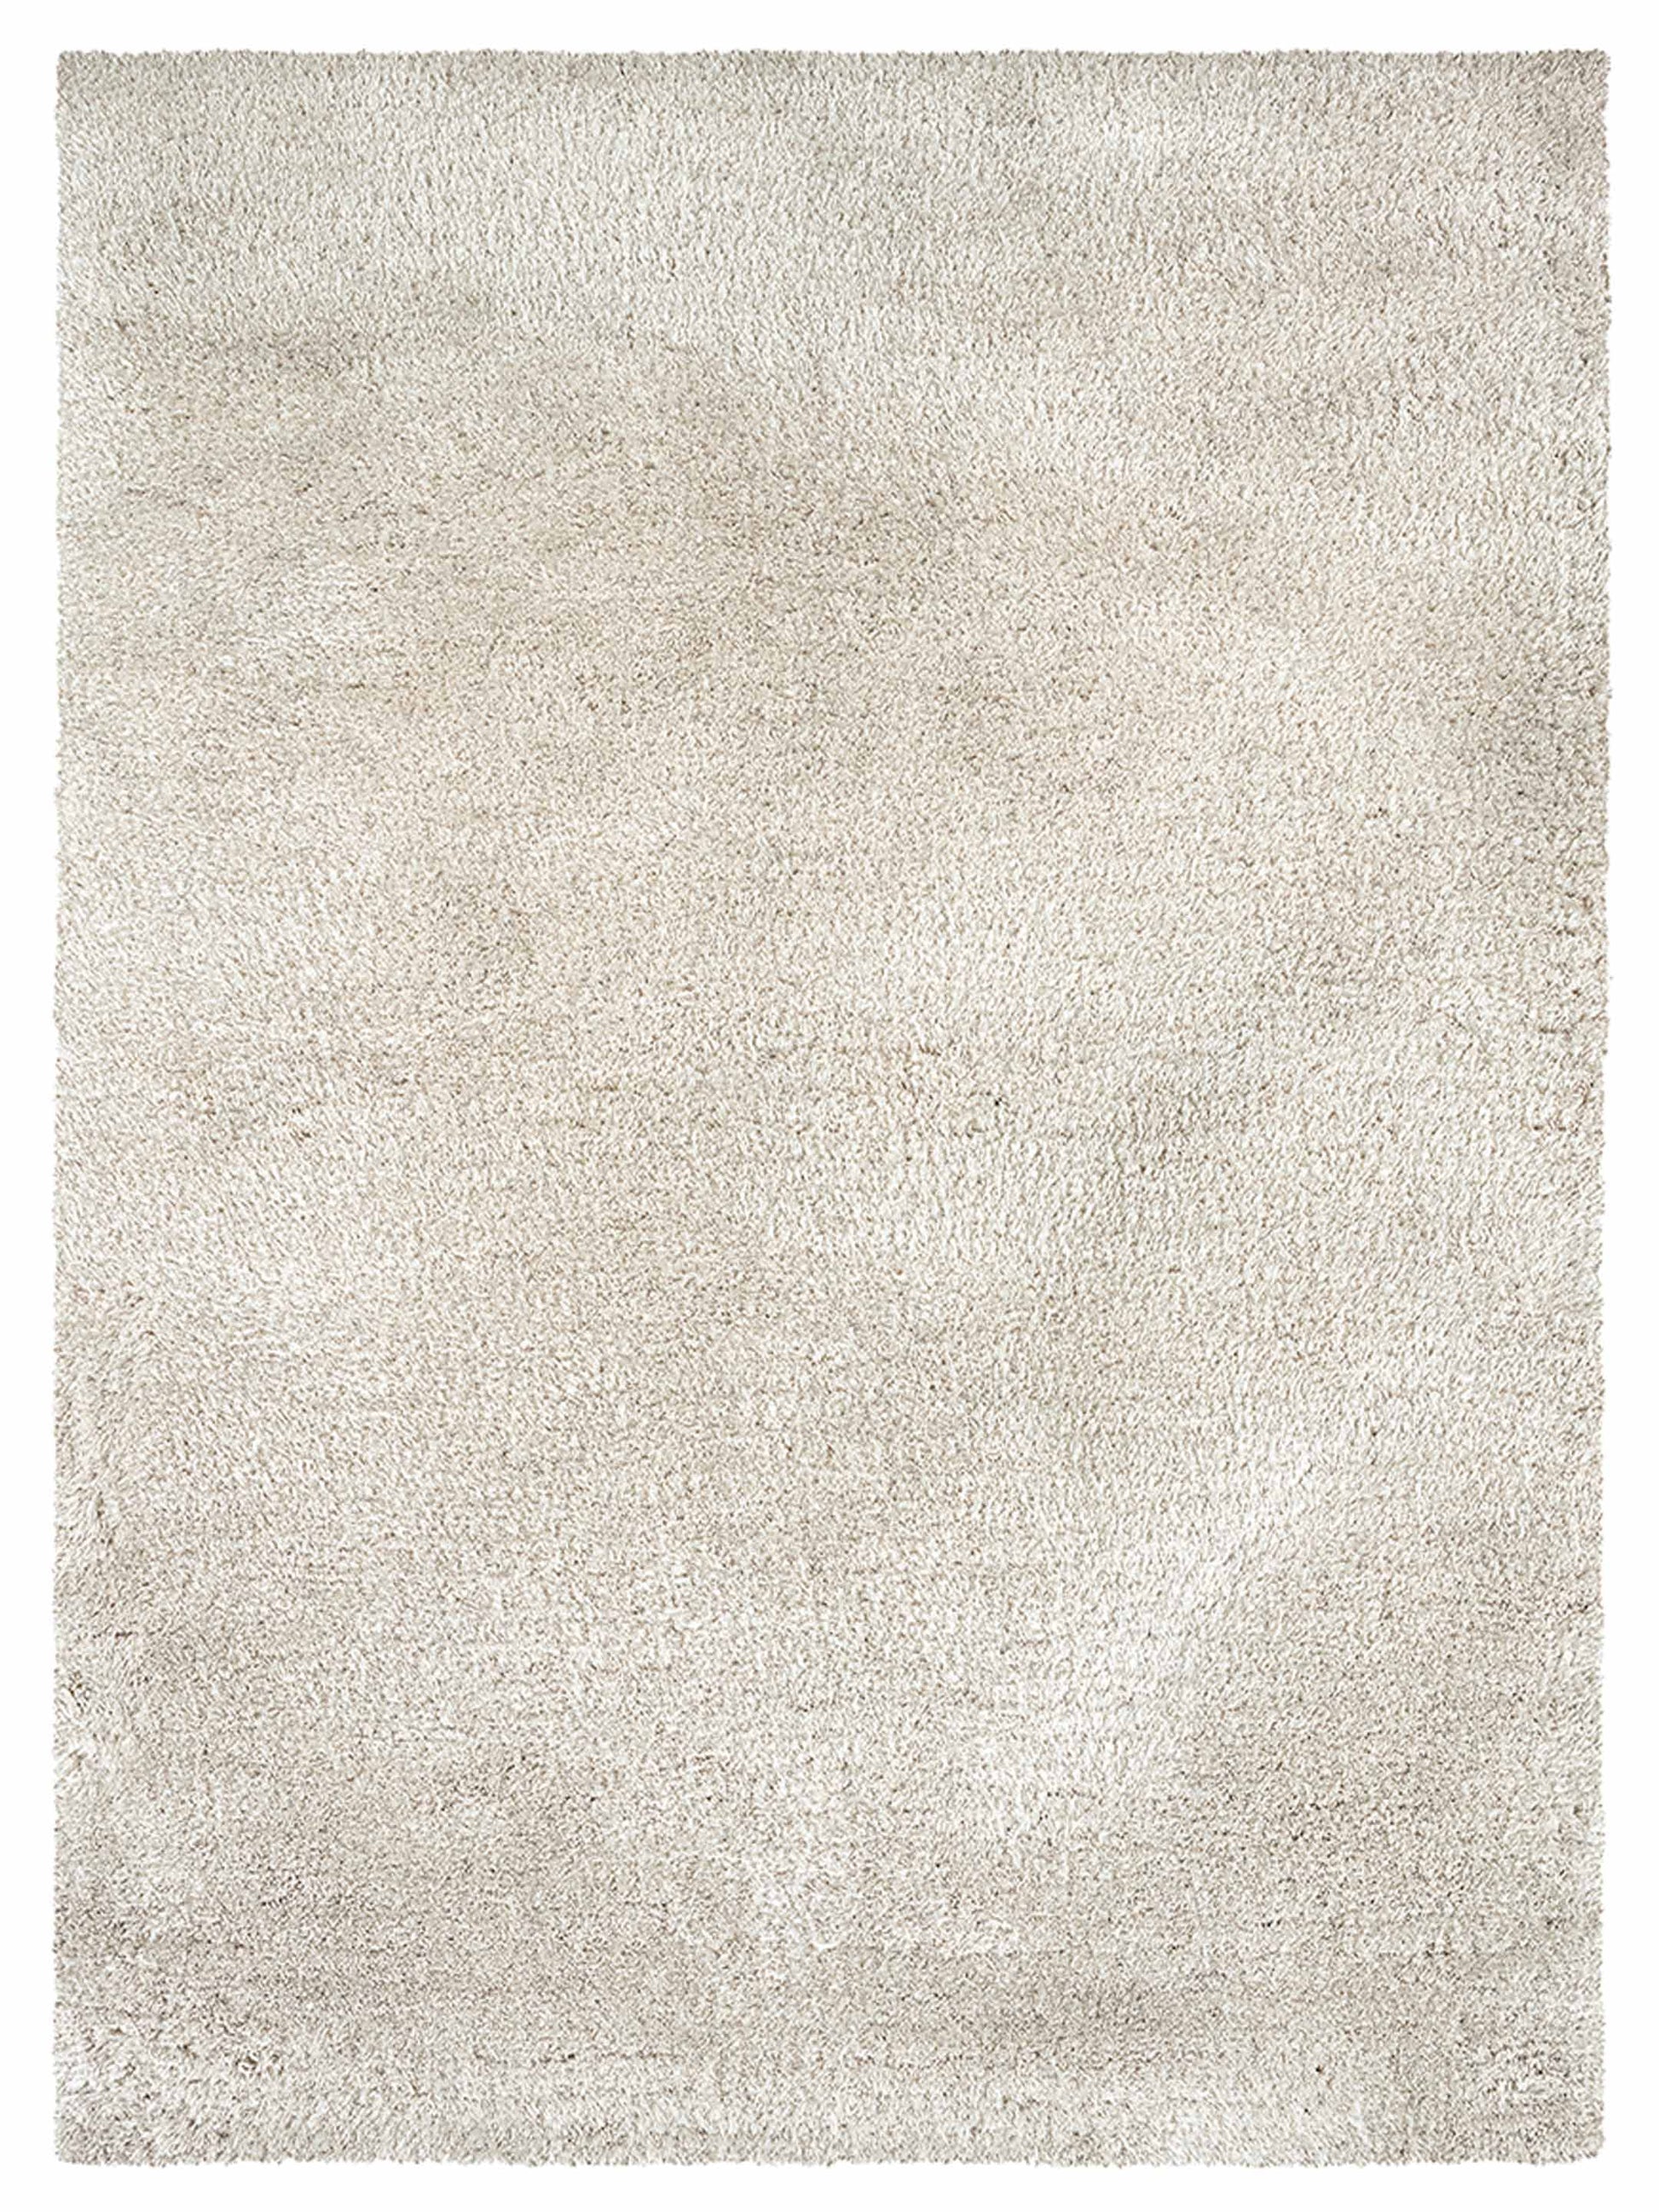 Oriental Weavers COSMO 81105 Ivory Shag Tufted Rug